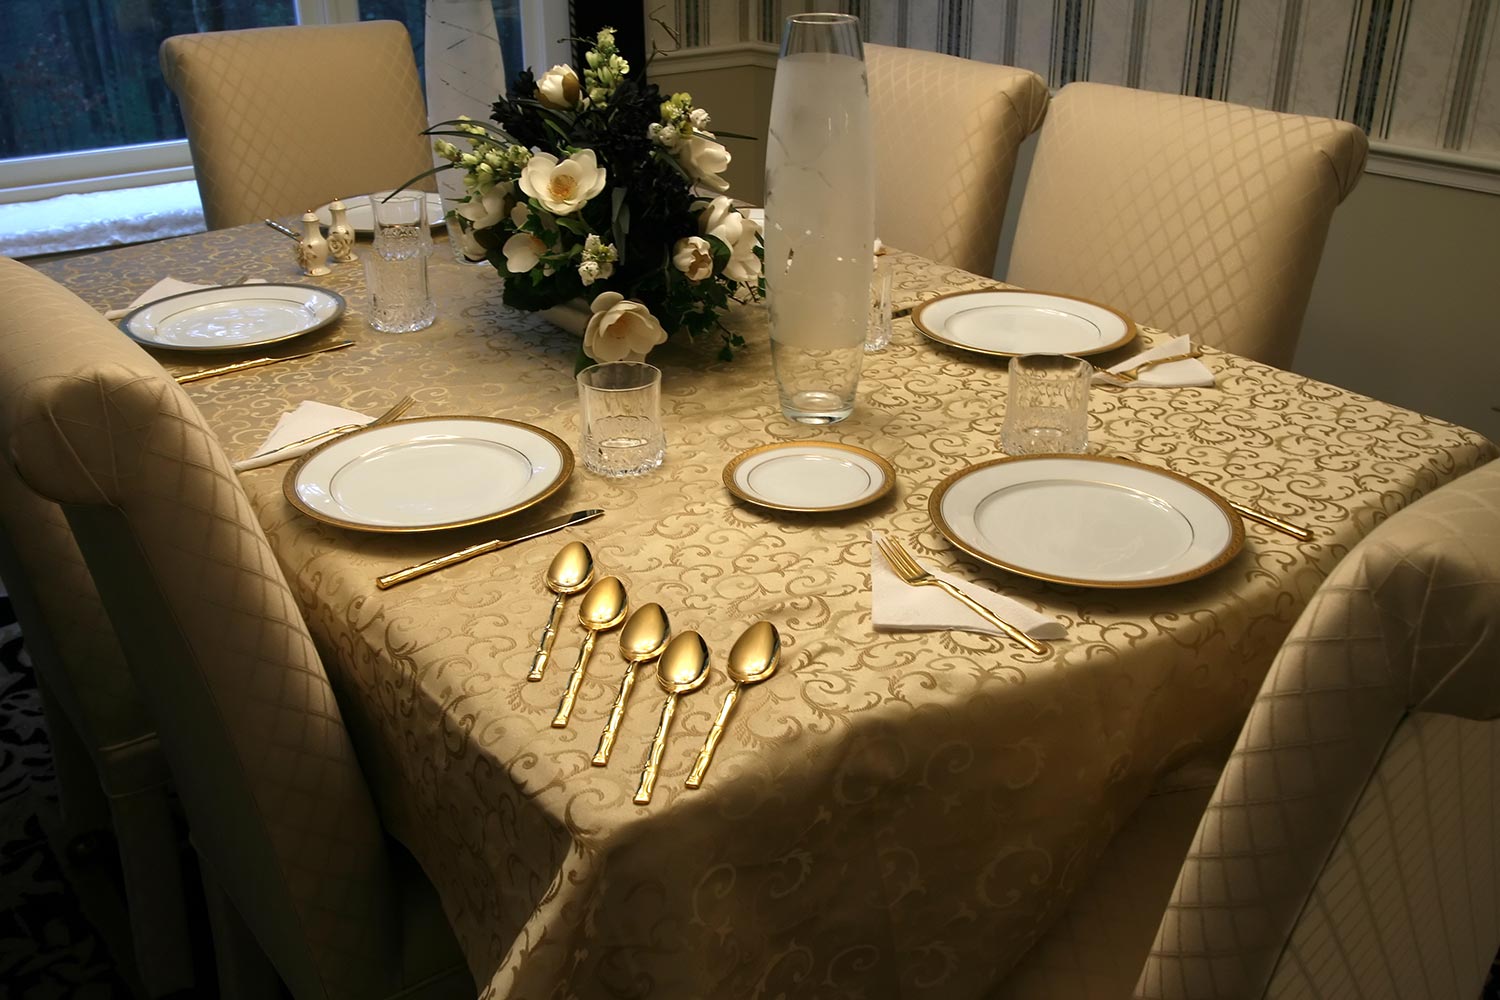 An elegant holiday dining table setting